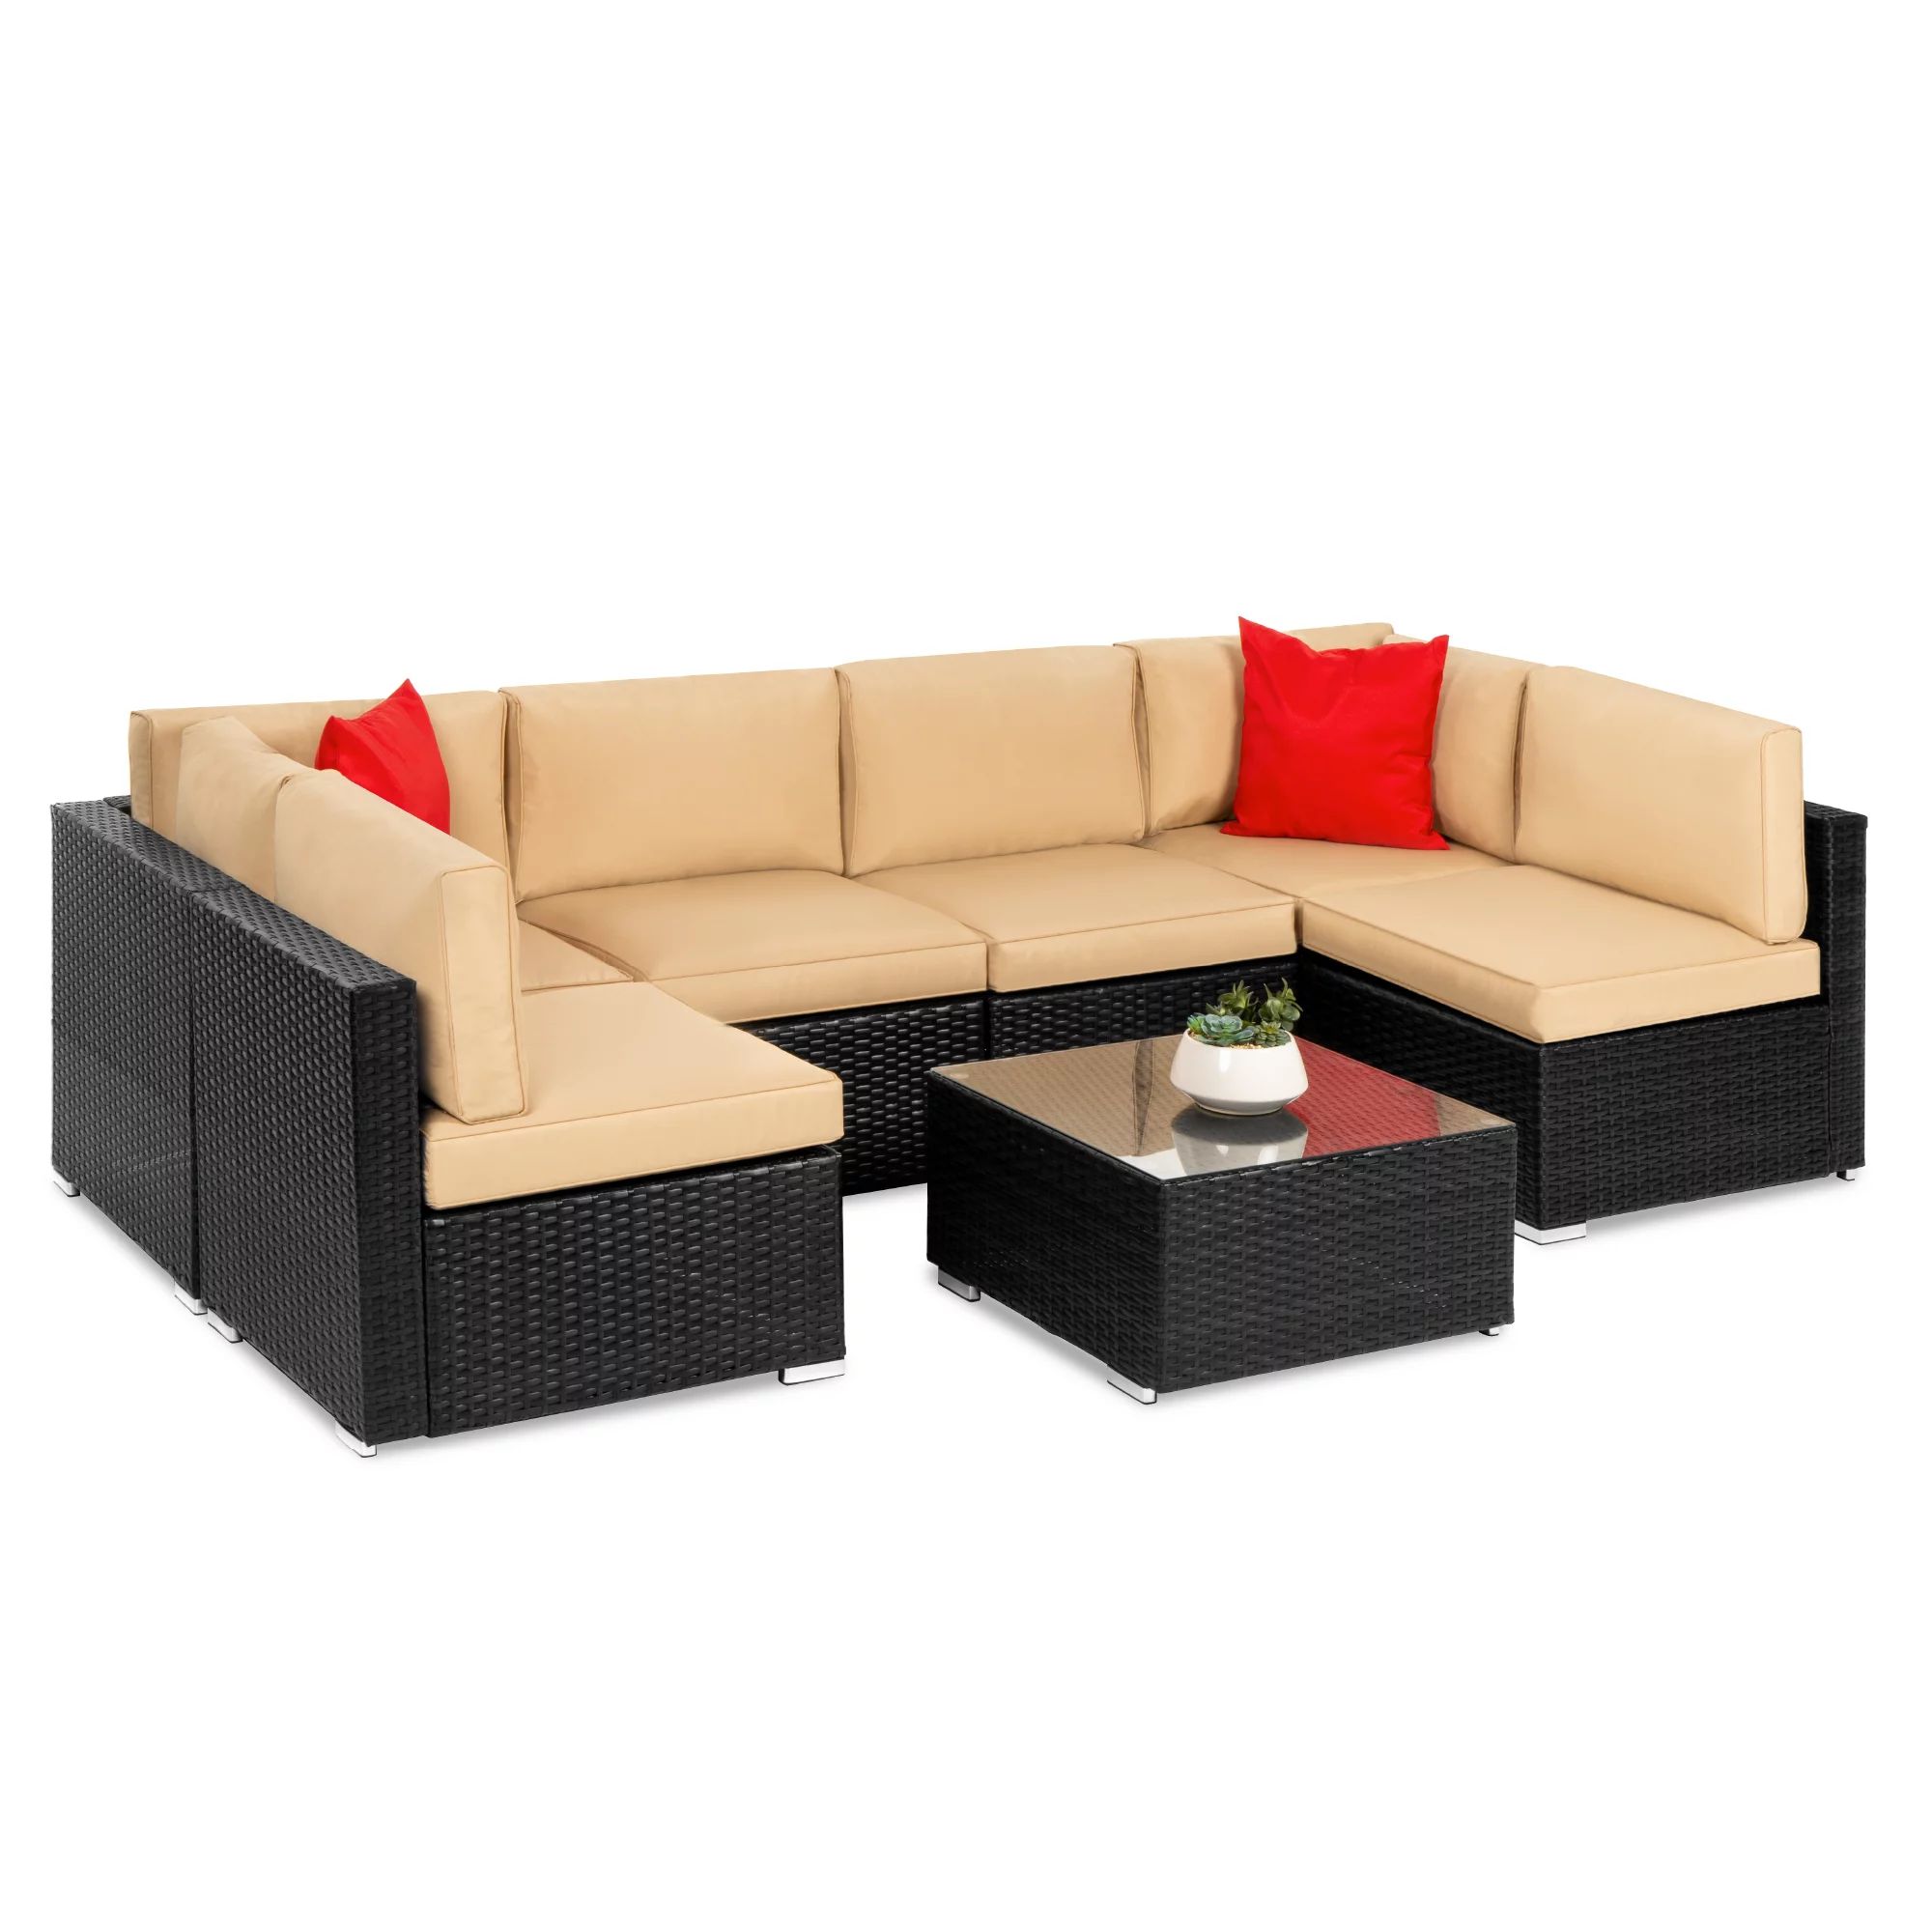 Best Choice Products 7-Piece Modular Outdoor Patio Furniture Set, Wicker Sectional Sofas w/ Cover... | Walmart (US)